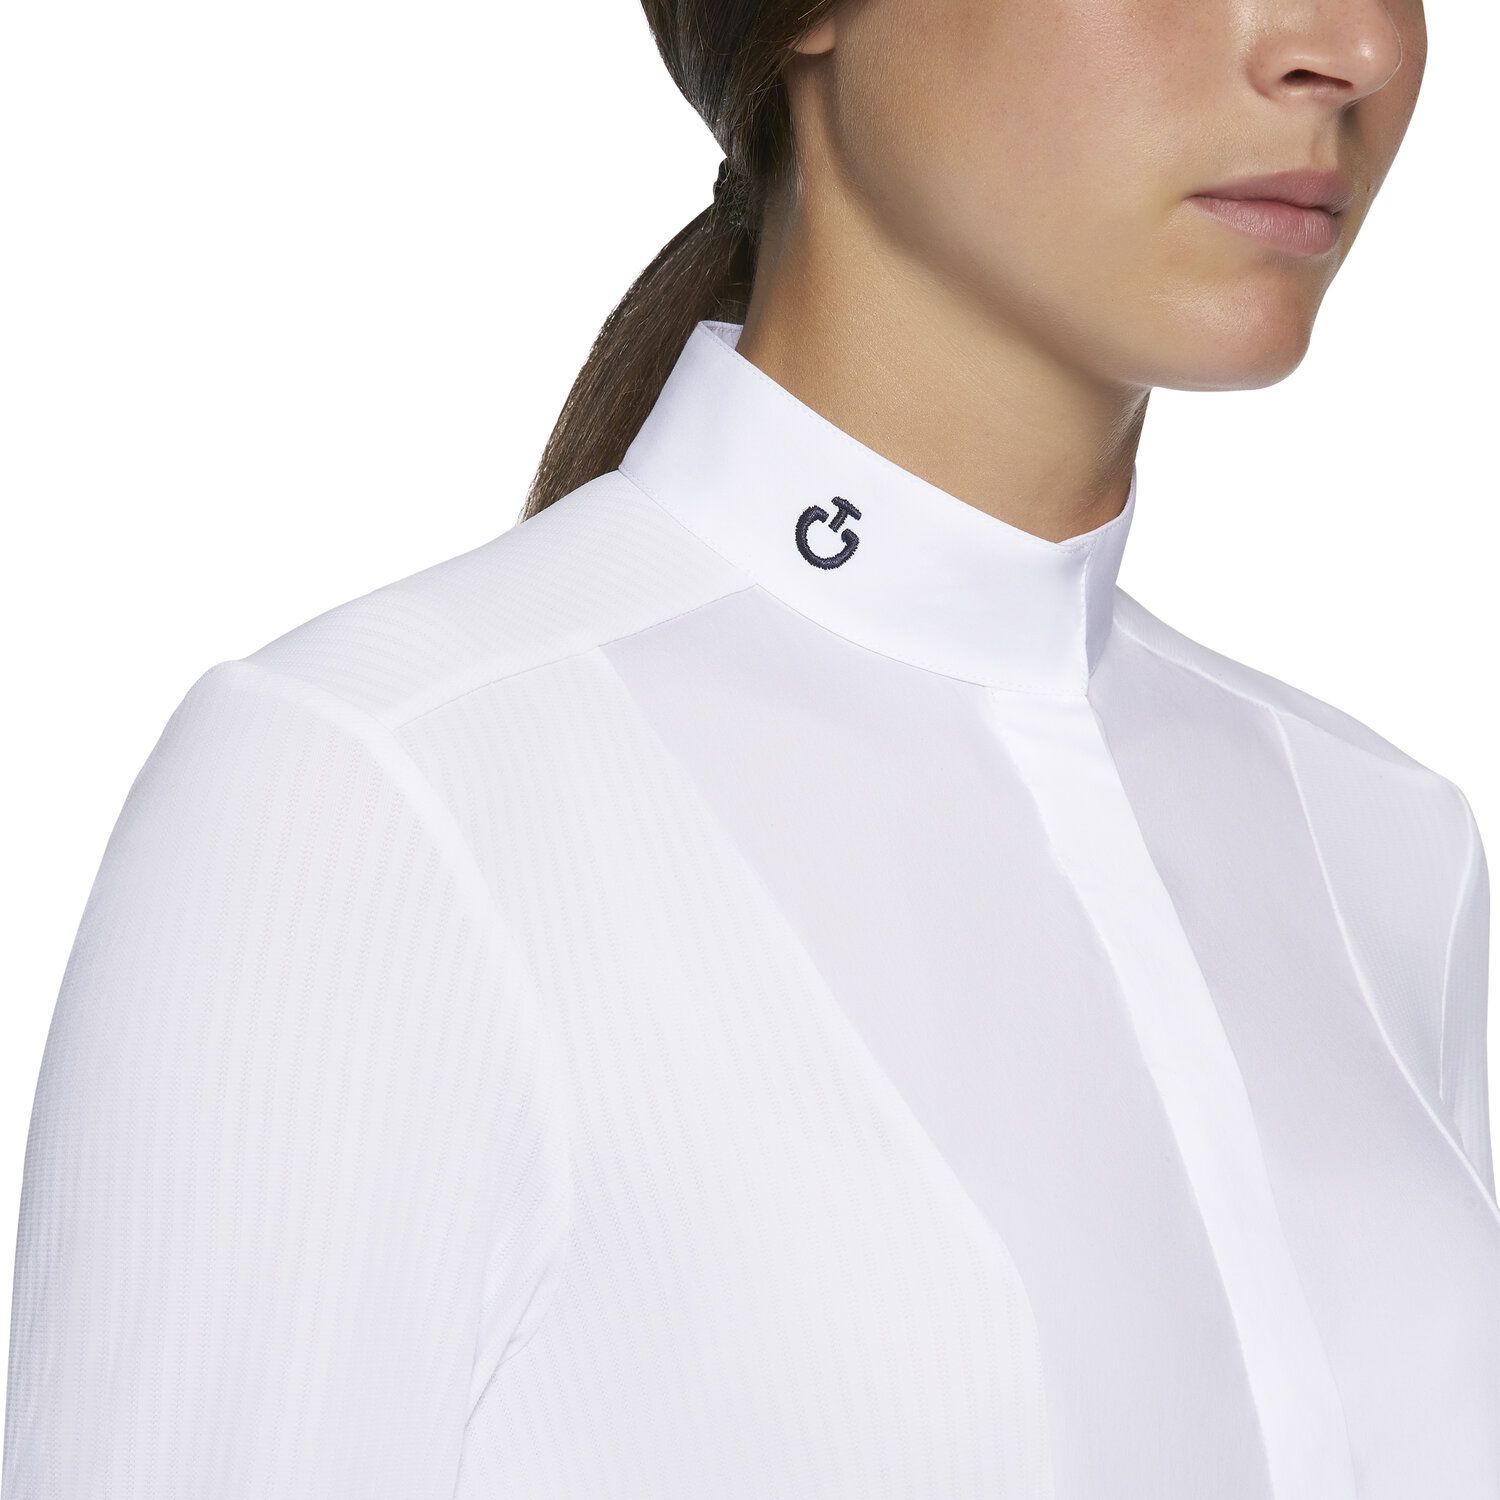 Cavalleria Toscana Women's micro perforated long-sleeved shirt WHITE/KNIT-4